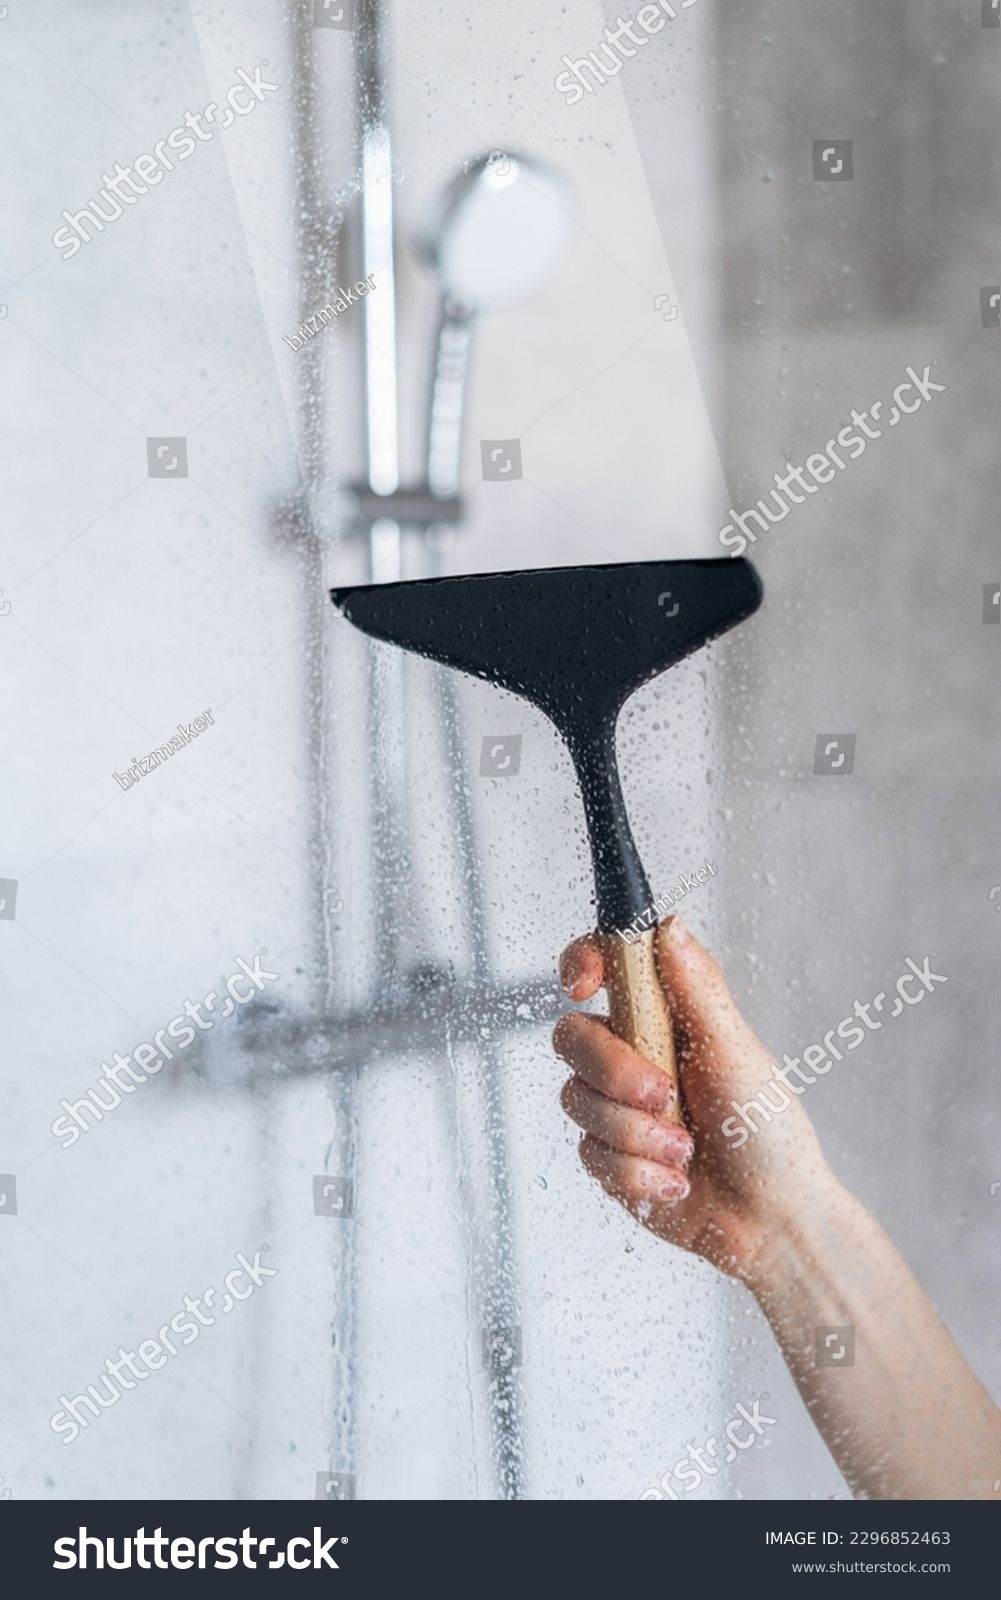 Closeup view of woman hand holding glass wiper and cleaning dirt and drops on shower partition in the bathroom. View on shower system as background. Cleaning service, washing concept #2296852463